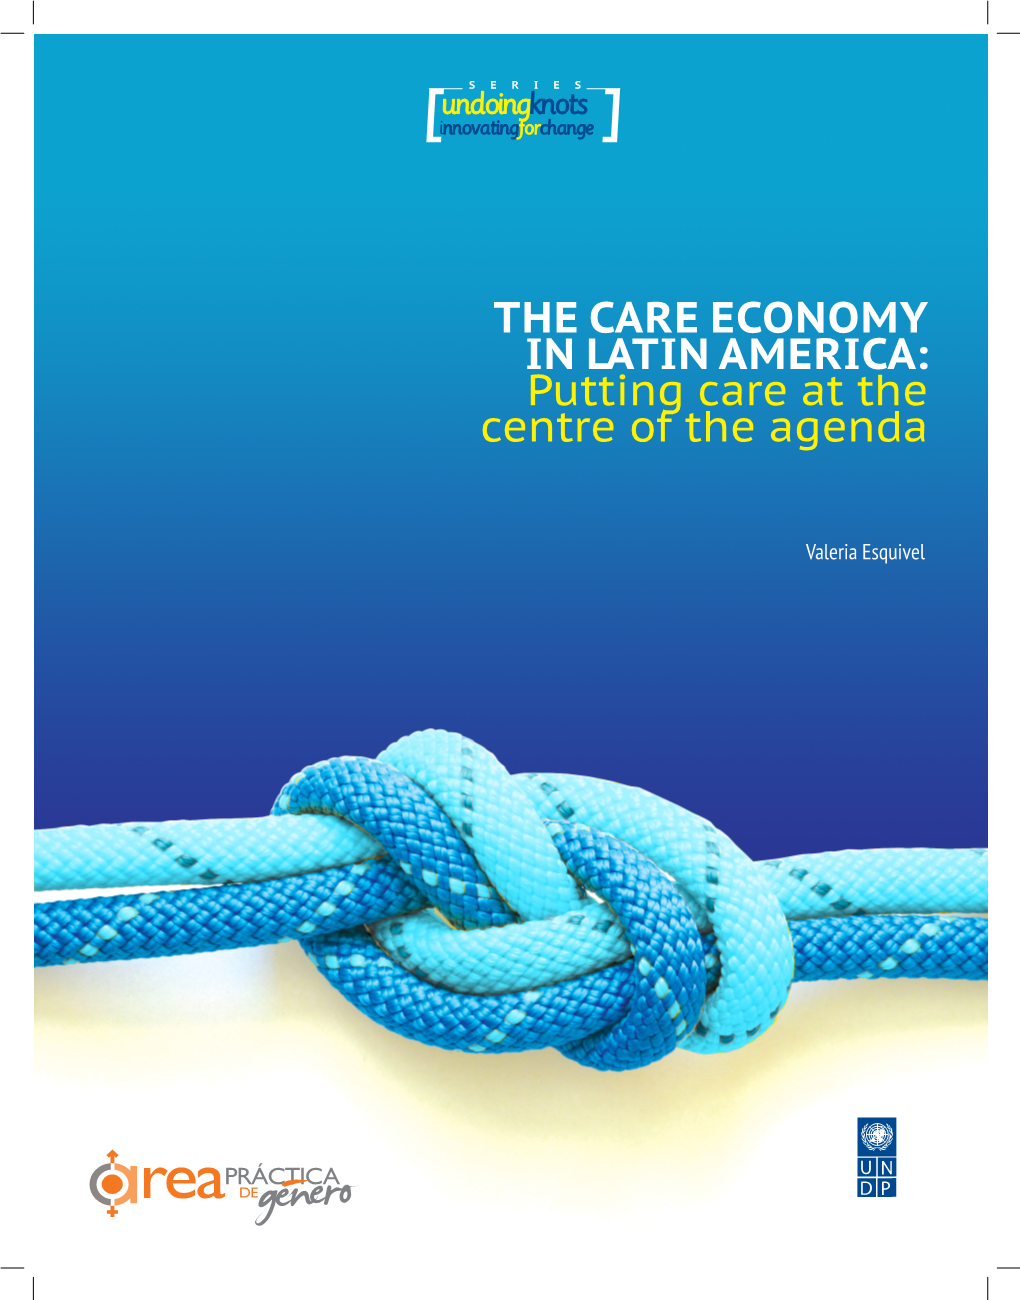 THE CARE ECONOMY in LATIN AMERICA: Putting Care at the Centre of the Agenda